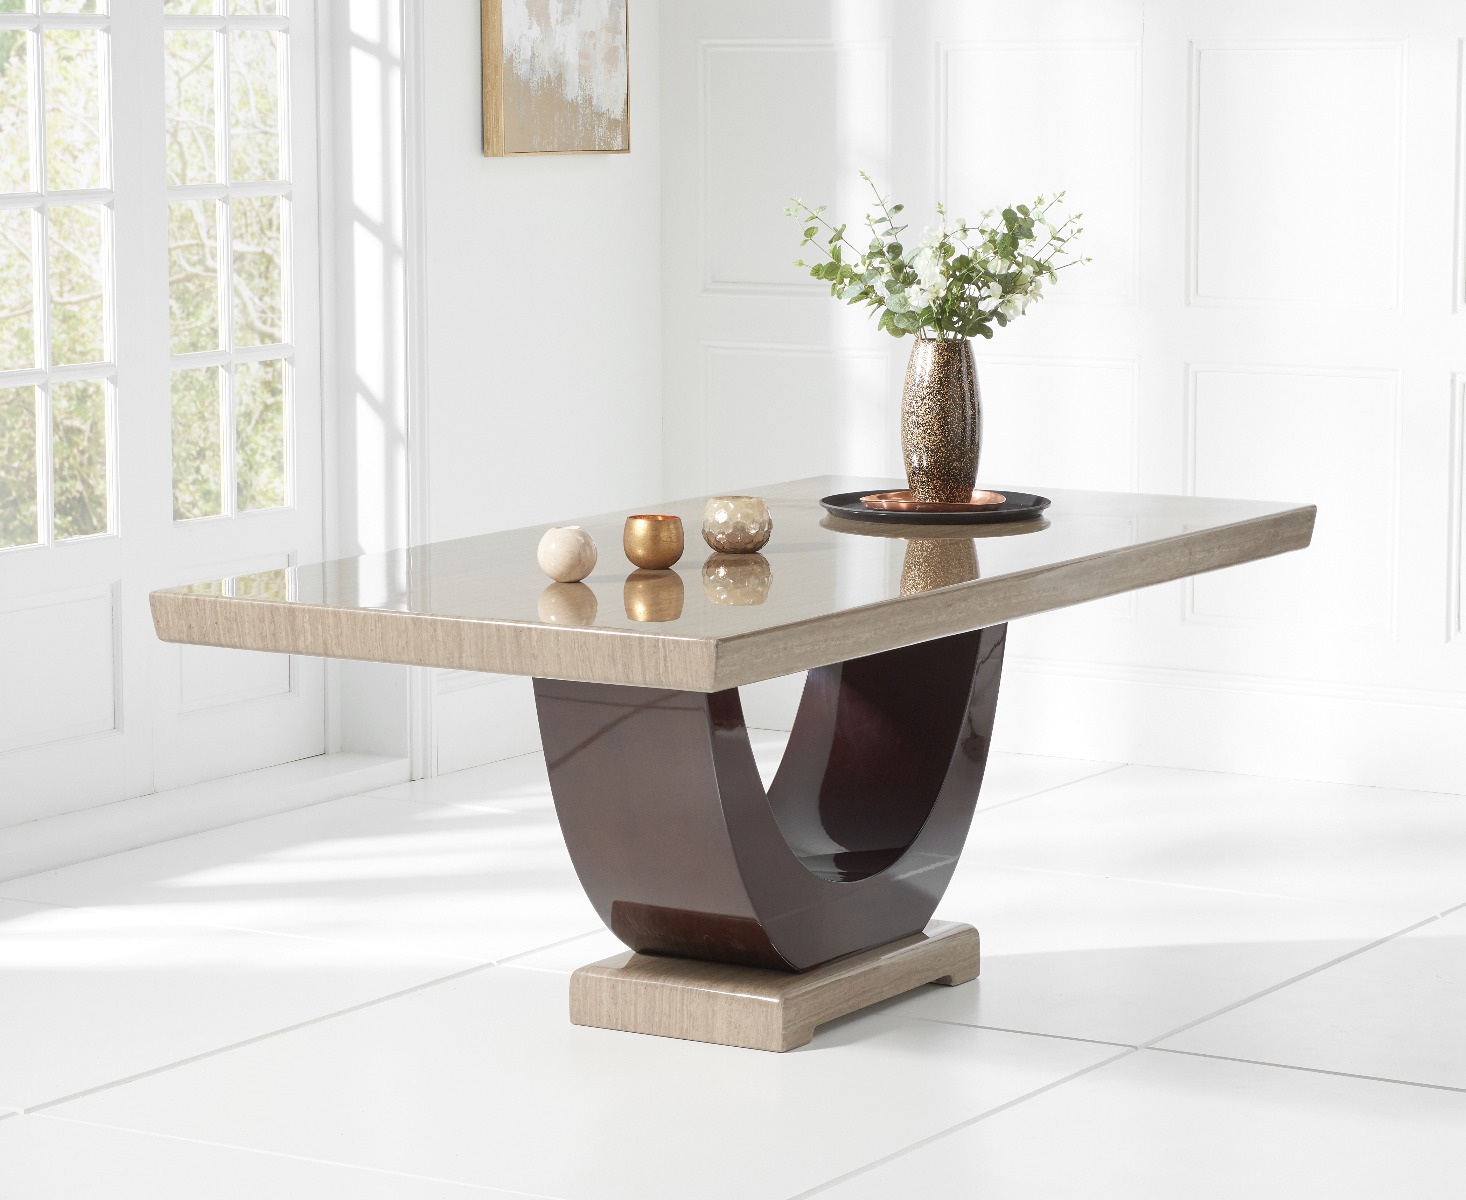 Photo 4 of Novara 200cm brown pedestal marble dining table with 6 brown novara chairs